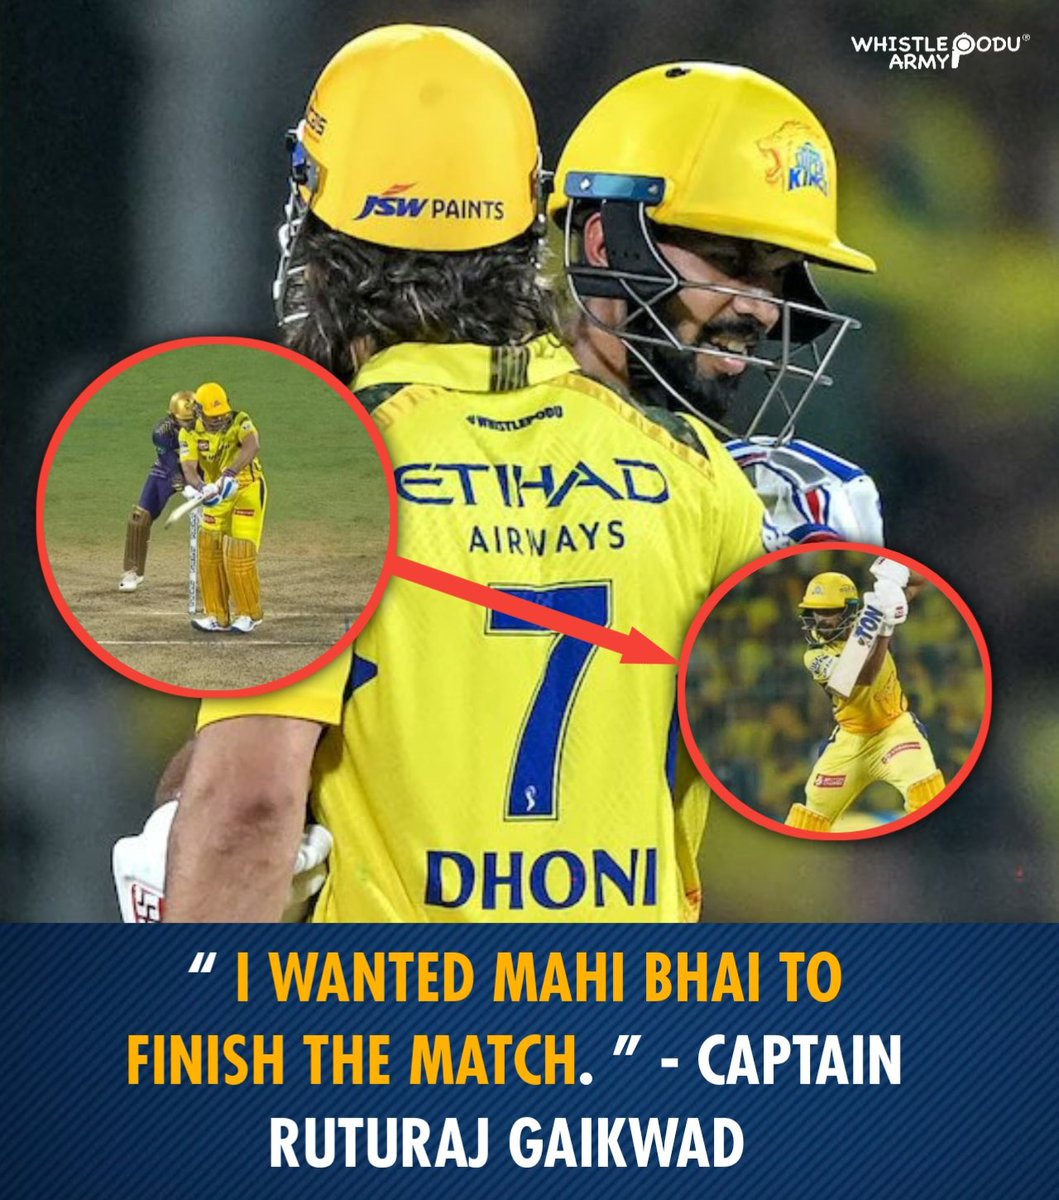 'Little bit of nostalgia for me. My first 50 in IPL, Mahi bhai was with me and Today I wanted Mahi Bhai to finish the game - Ruturaj 💛 #WhistlePodu #CSK #Yellove